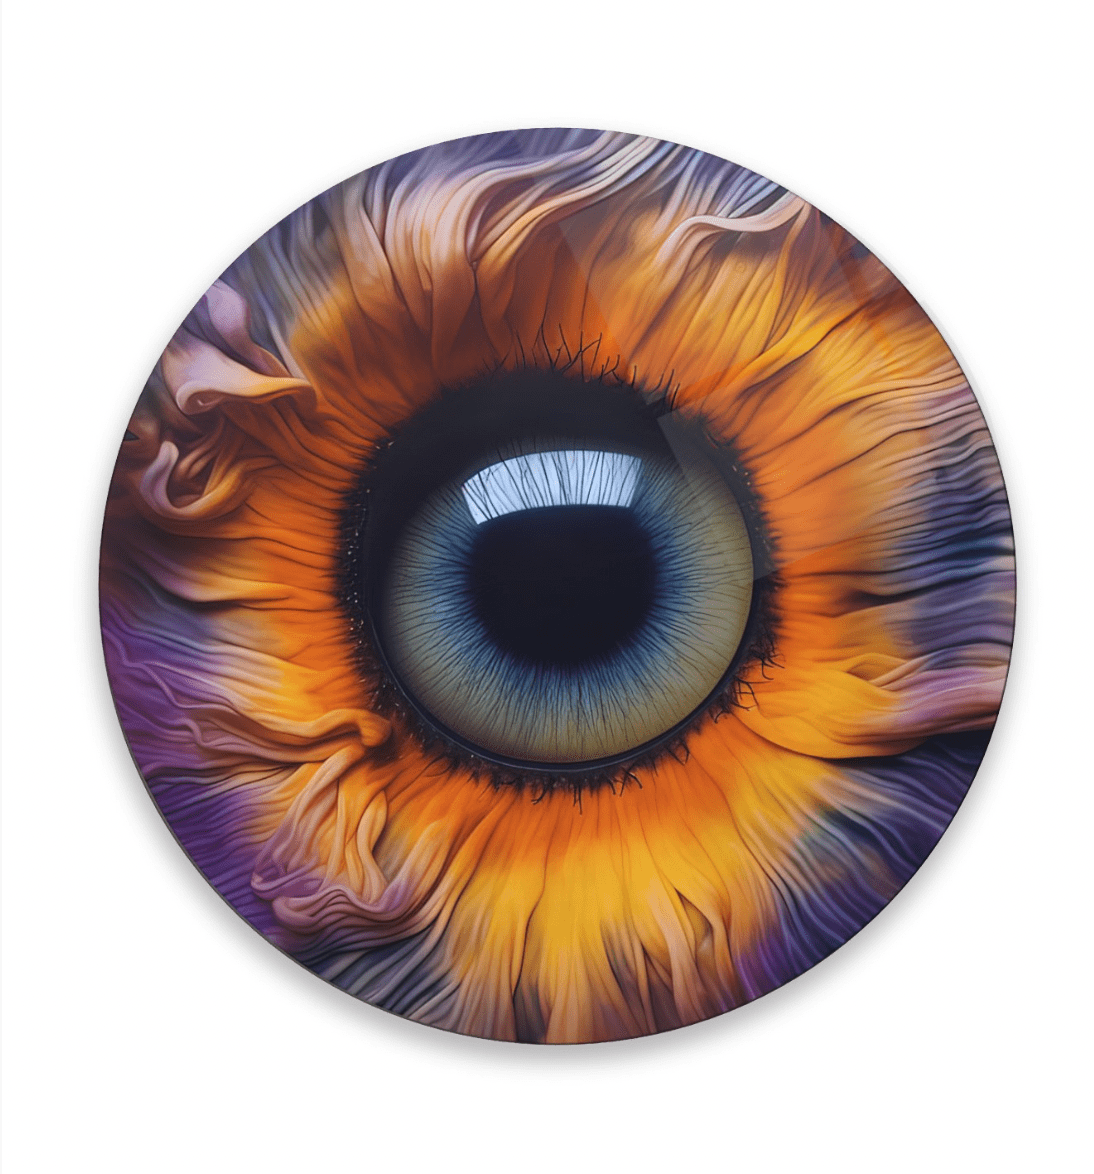 Colourful Deep Eye Rounded Glass Wall Art